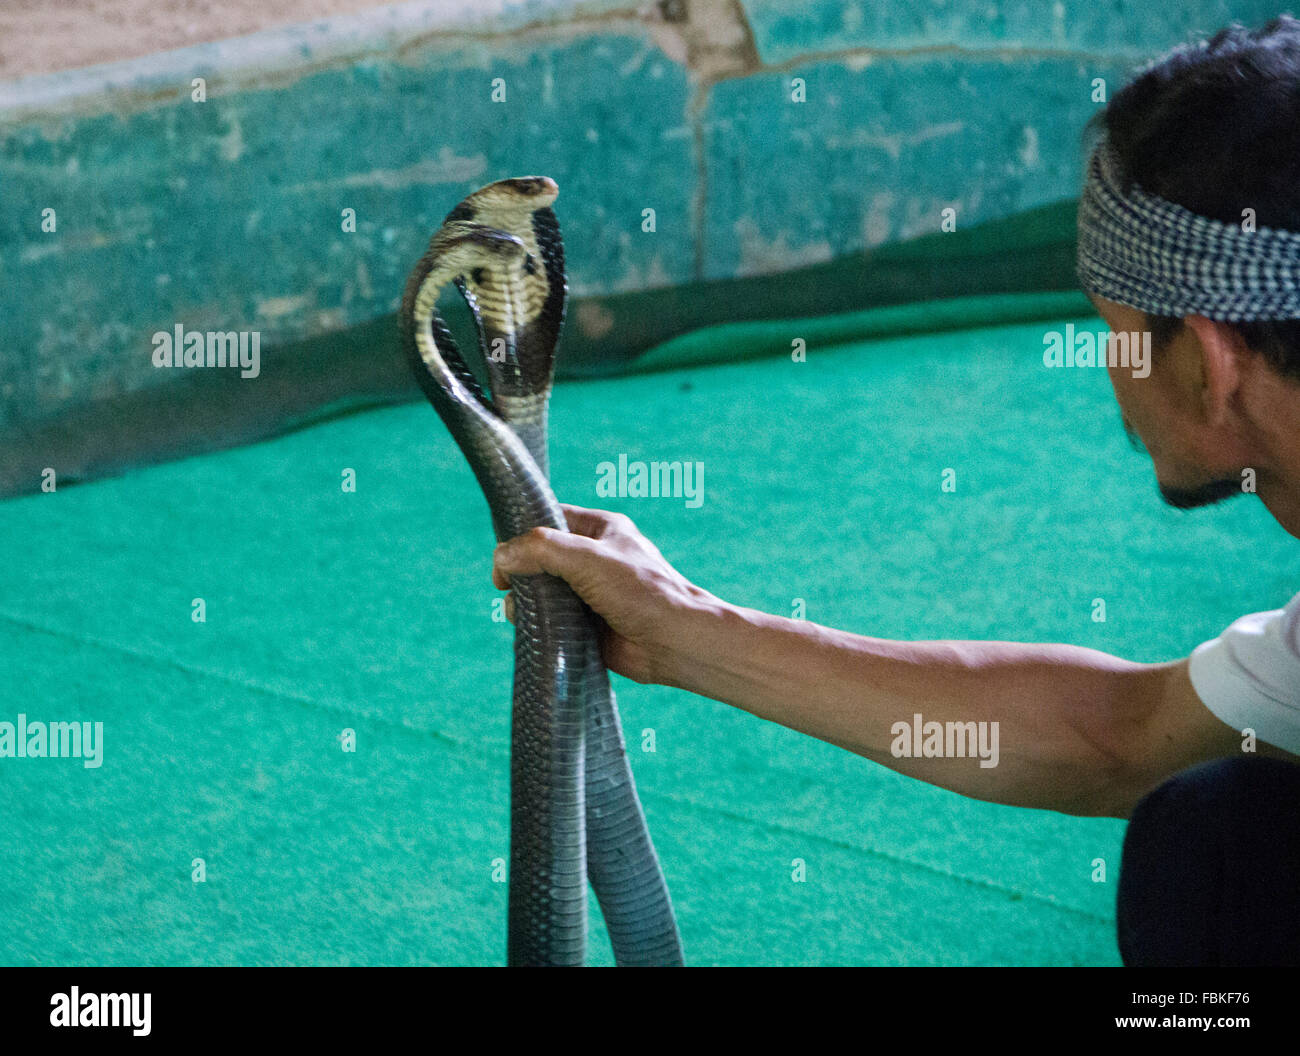 Snake handlers perform during a snake show at the Mae SA Snakes Farm in Maerim, Chiang Mai. Stock Photo